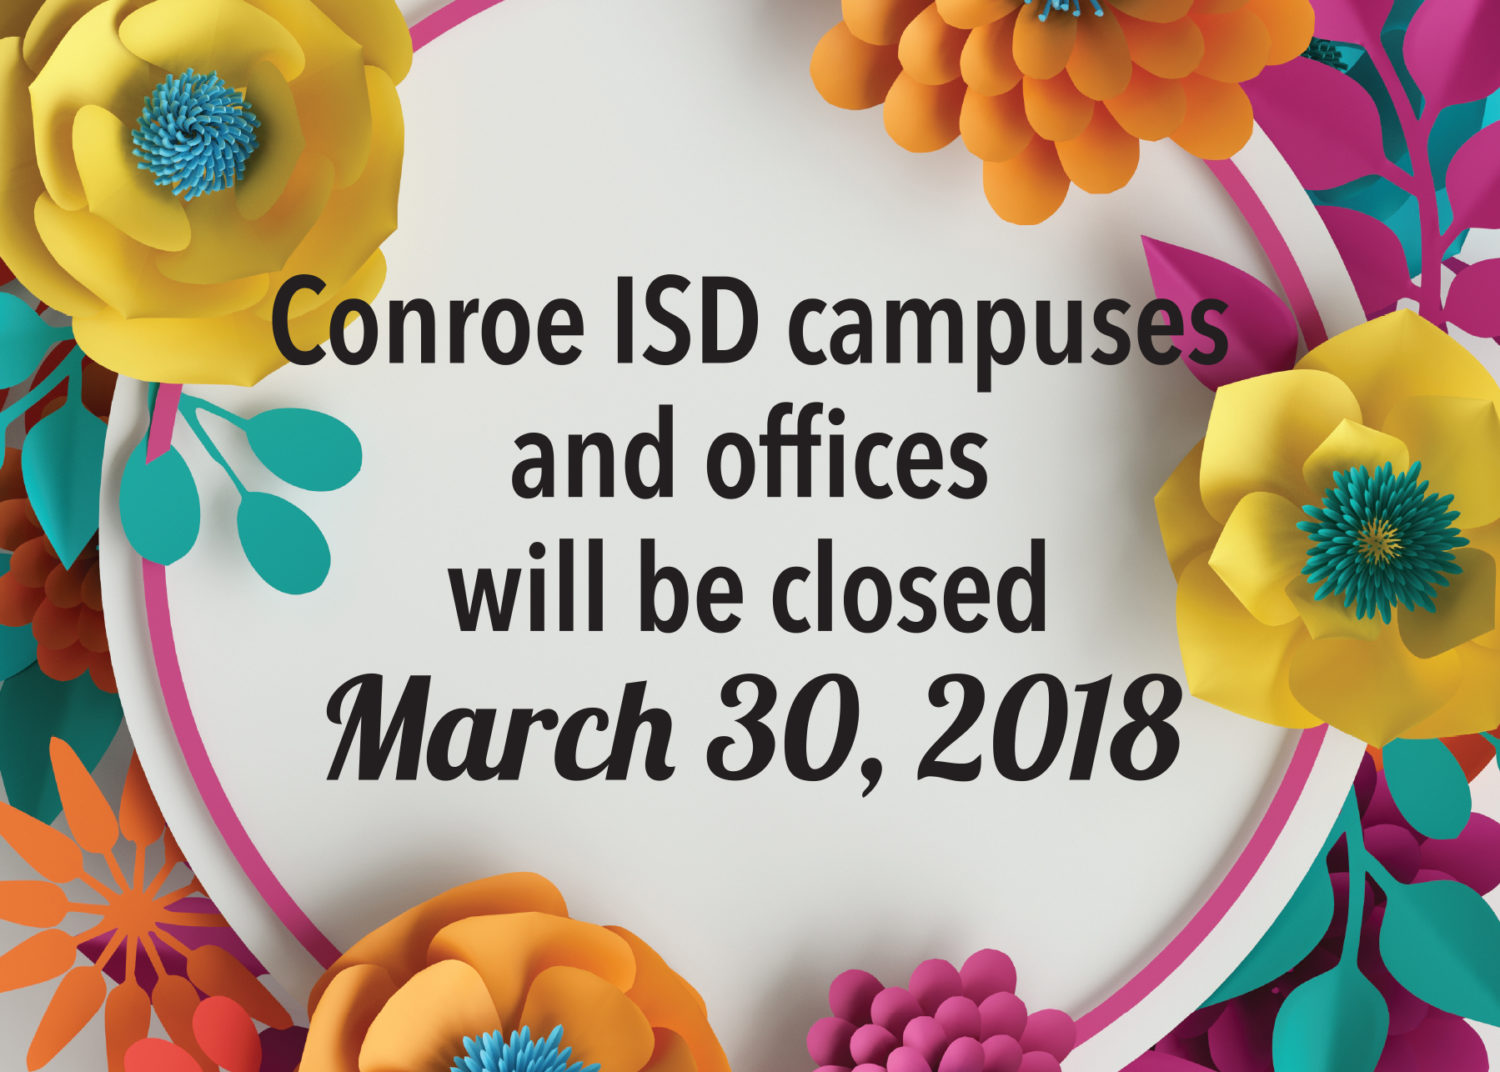 Conroe ISD campuses and offices will be closed March 30, 2018